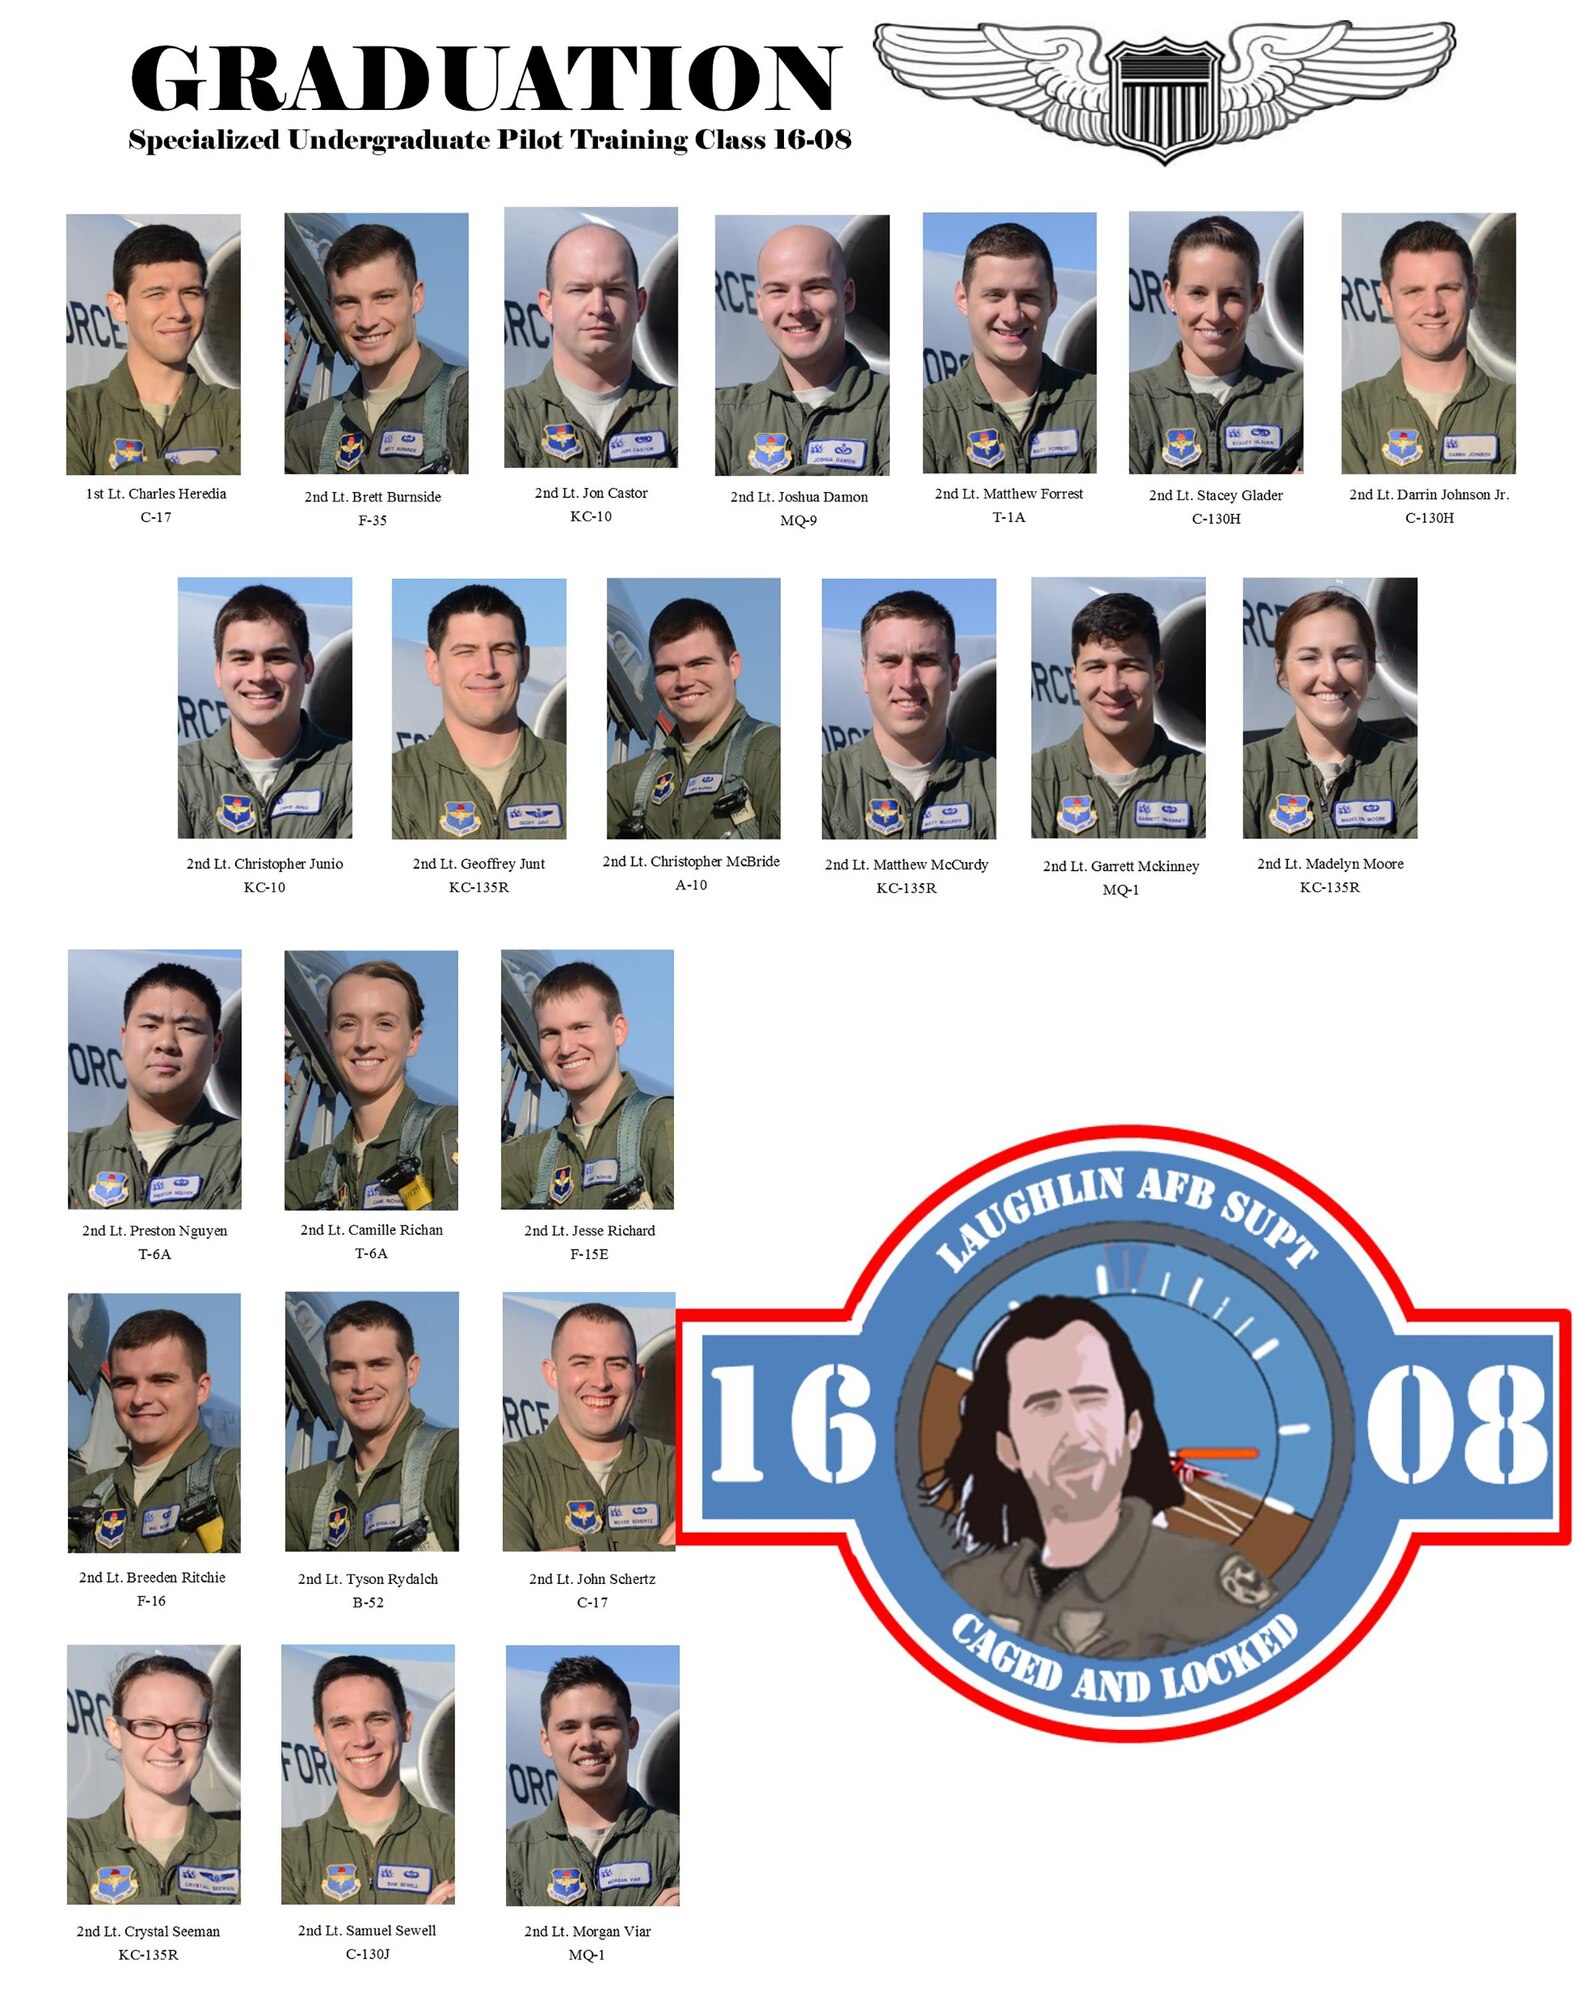 Specialize Undergraduate Pilot Training Class 16-08 is set to graduate. (U.S. Air Force graphic by Airman 1st Class Brandon May)